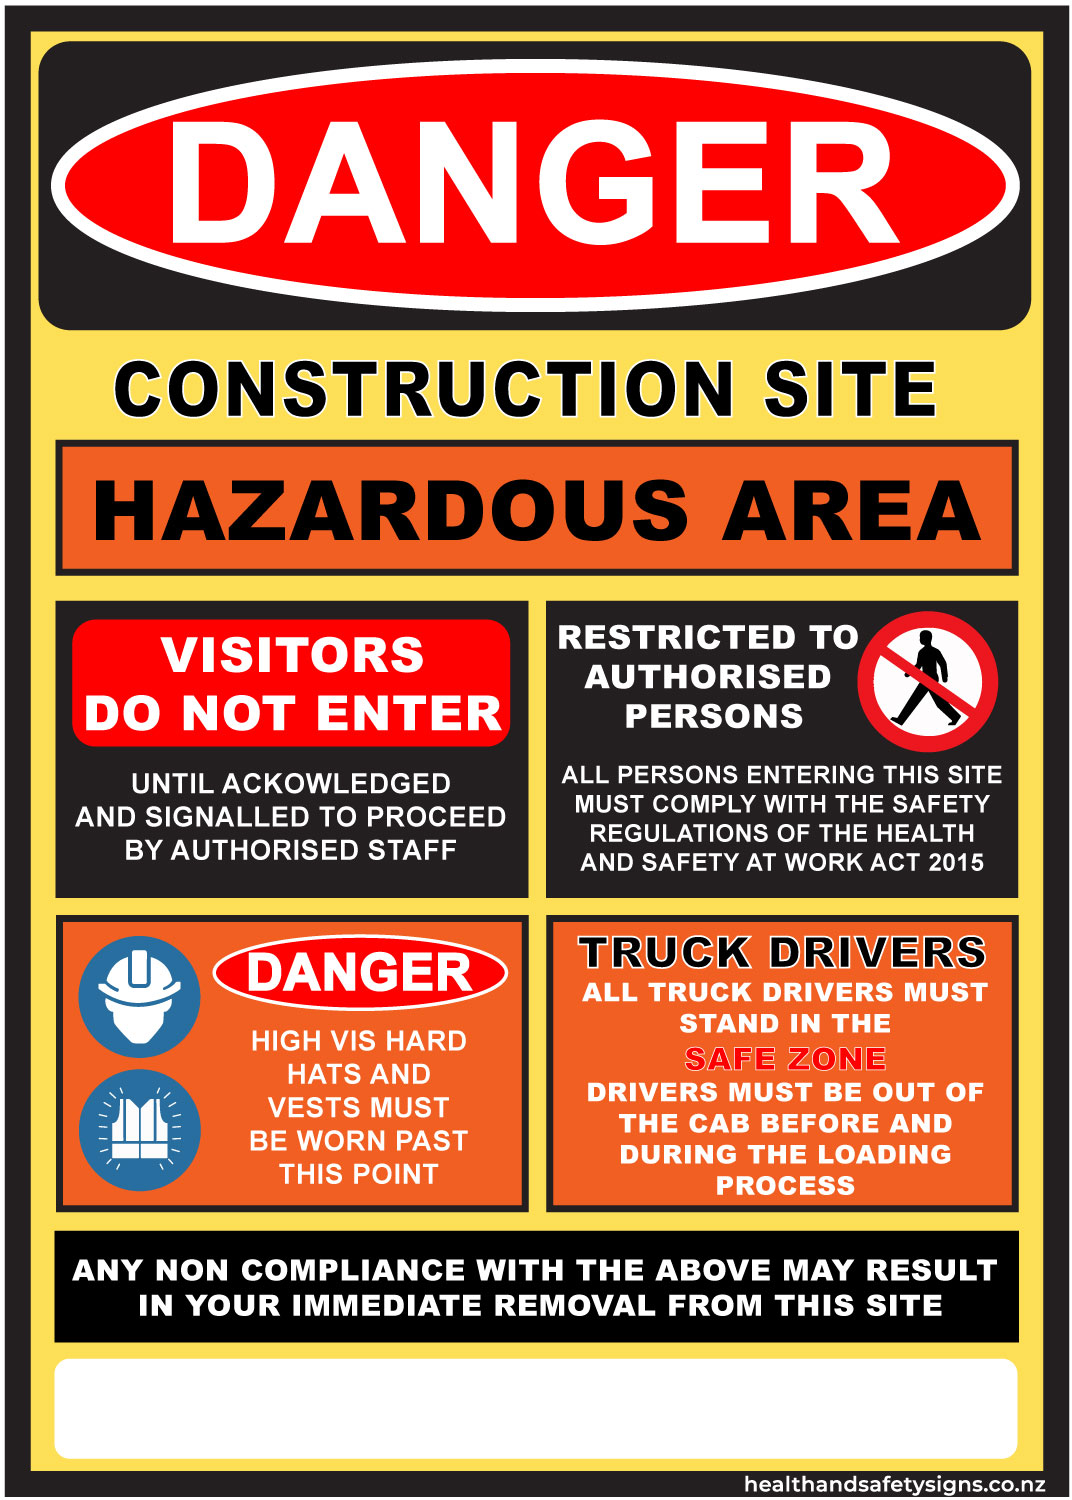 construction-site-hazardous-area-danger-sign-health-and-safety-signs